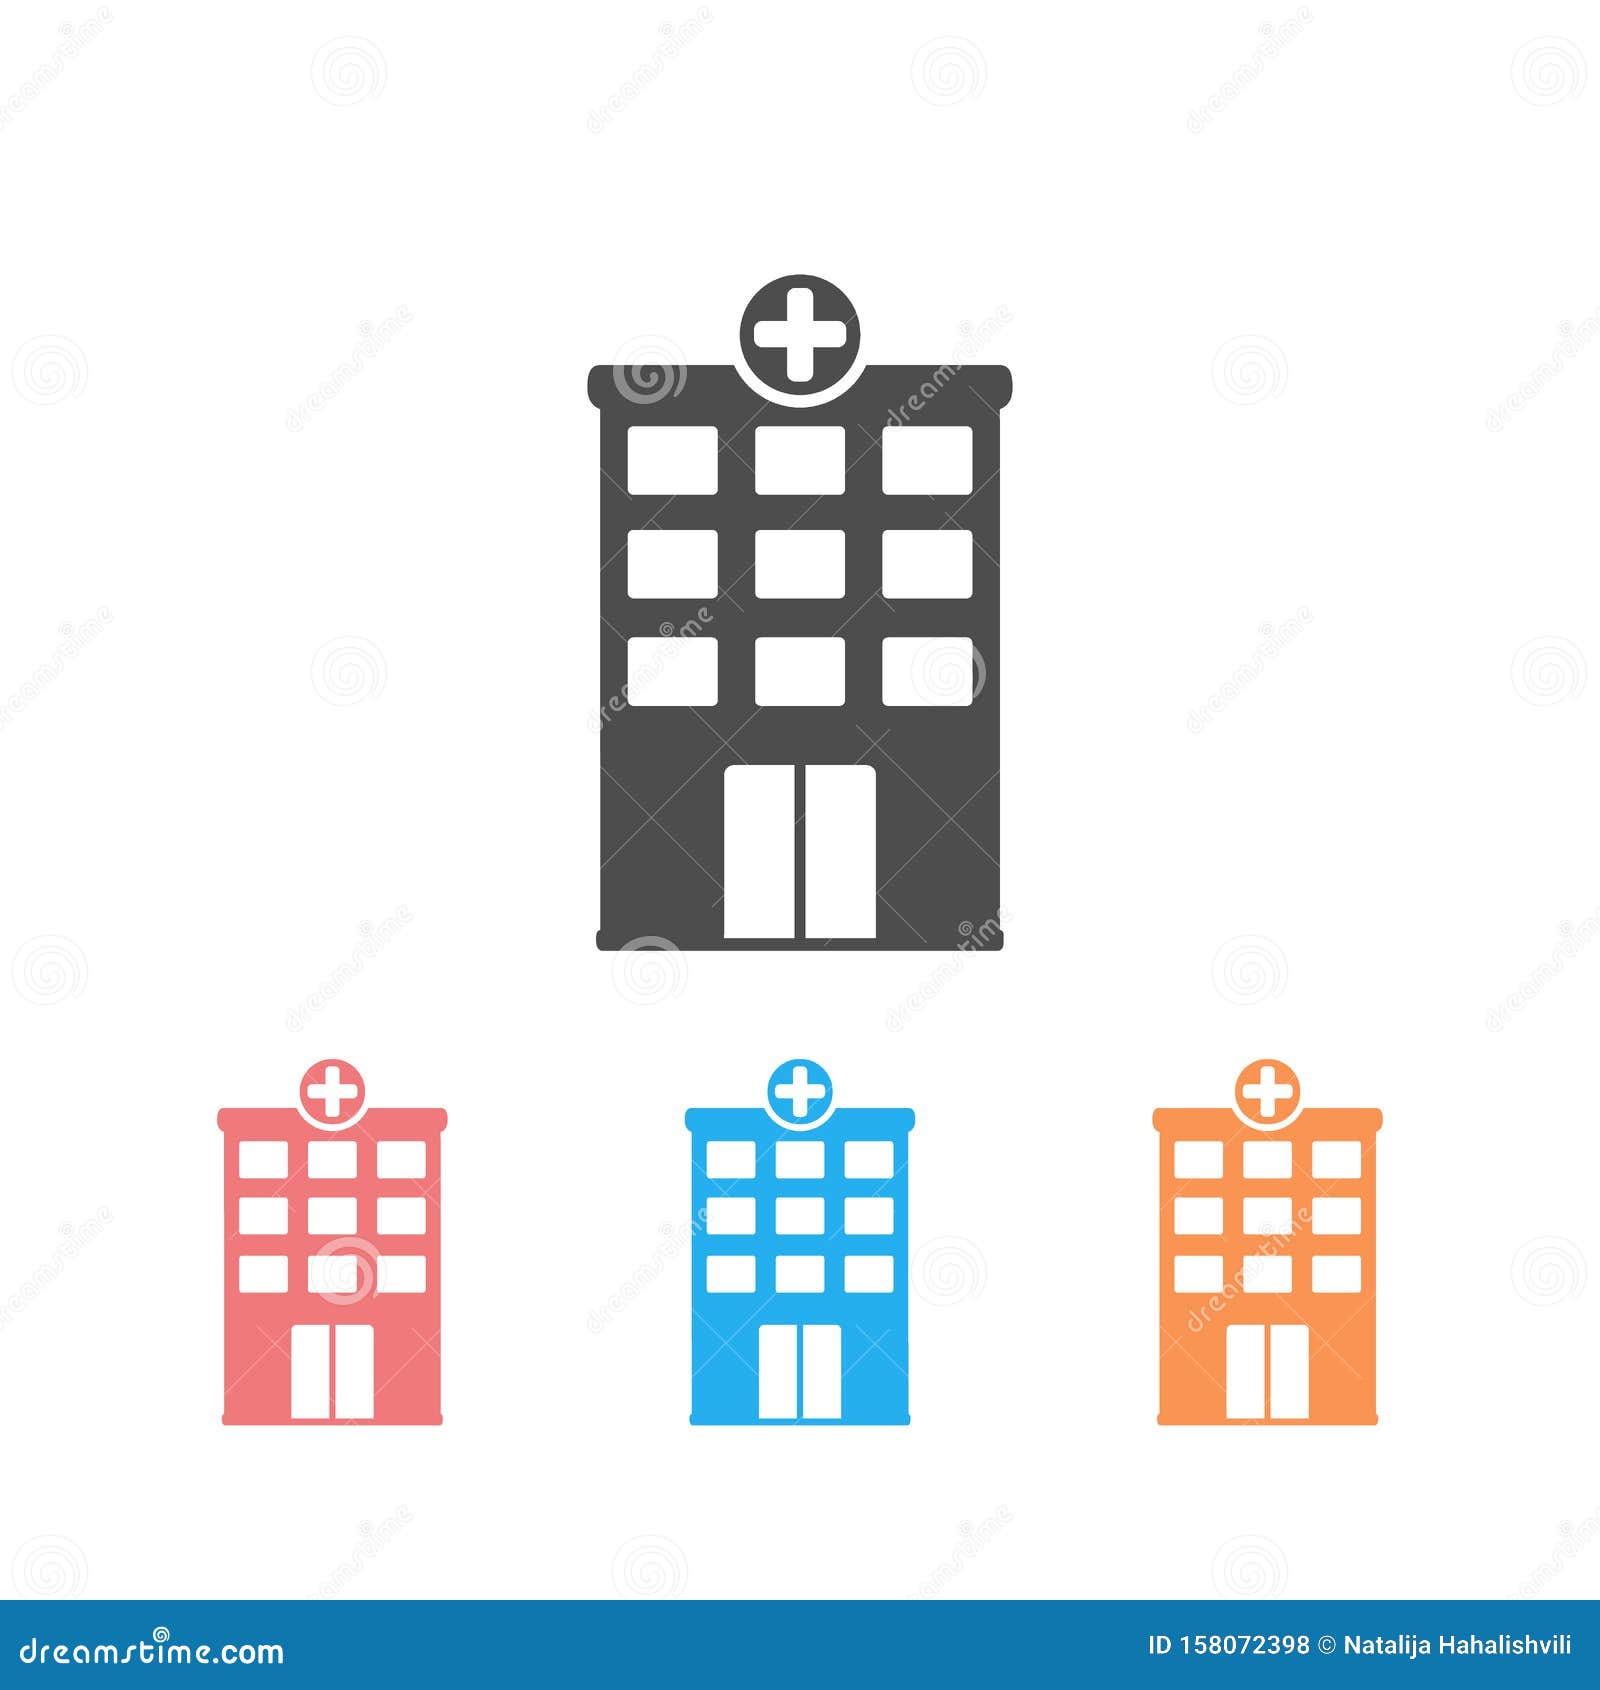 Hospital Building Vector Illustration Icon on White Stock Vector ...